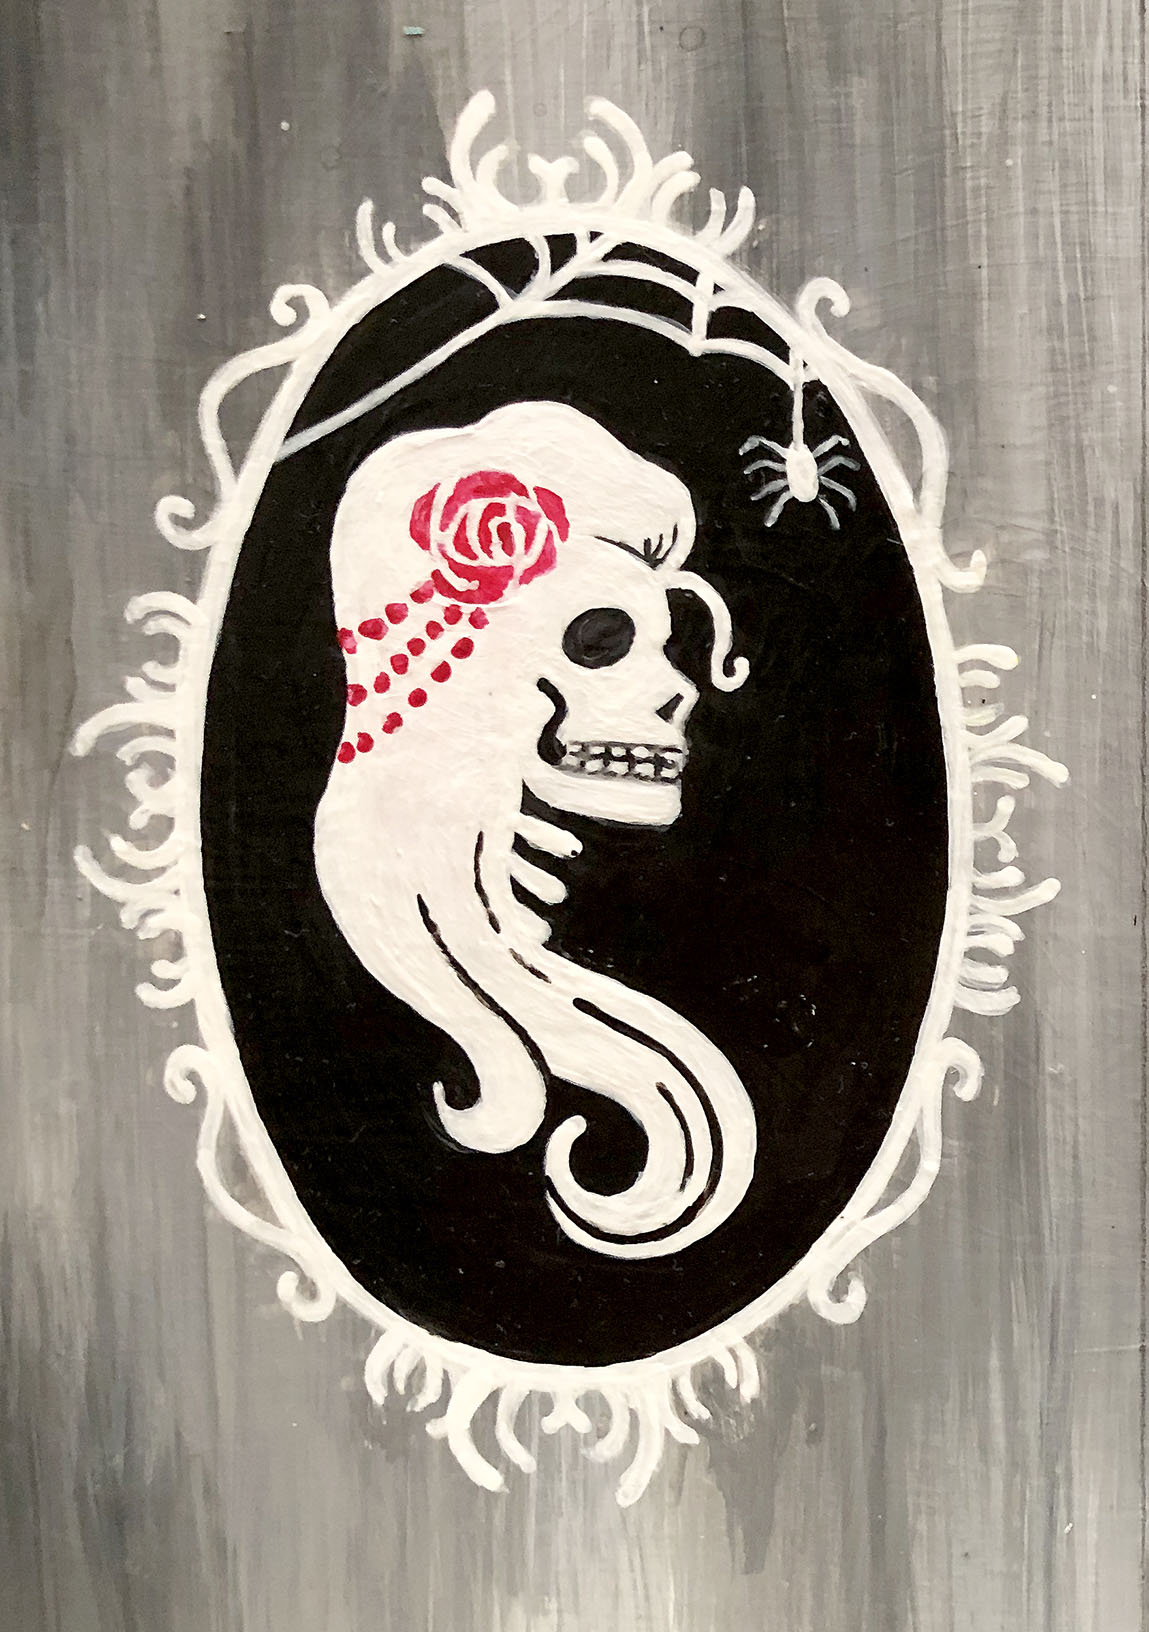 A Rosa Skull Cameo experience project by Yaymaker